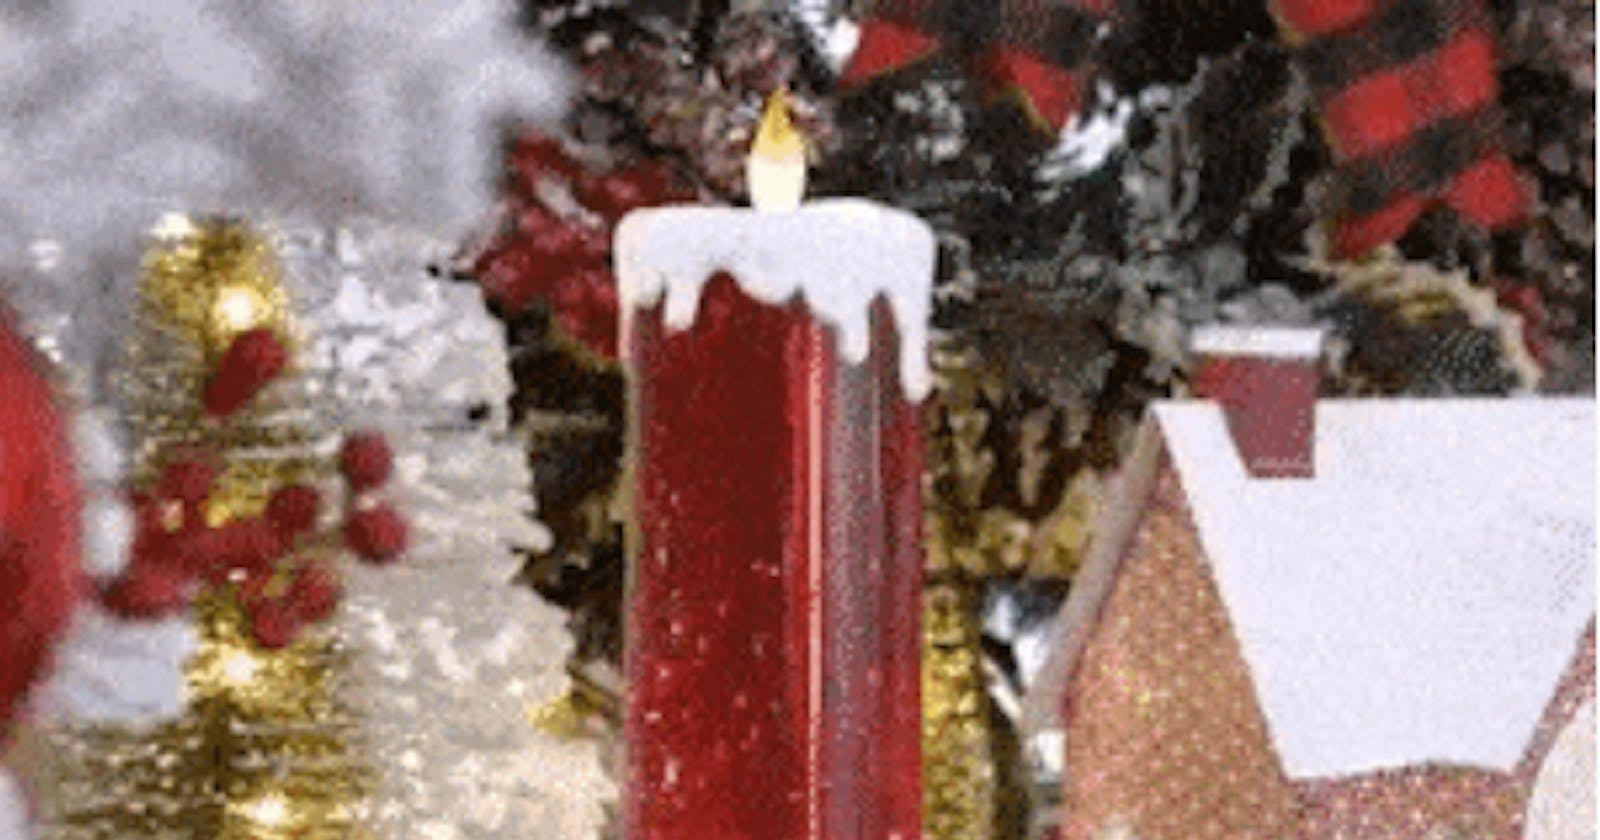 Swezida Com Reviews: Is this website selling LED Christmas Candles With Pedestal?